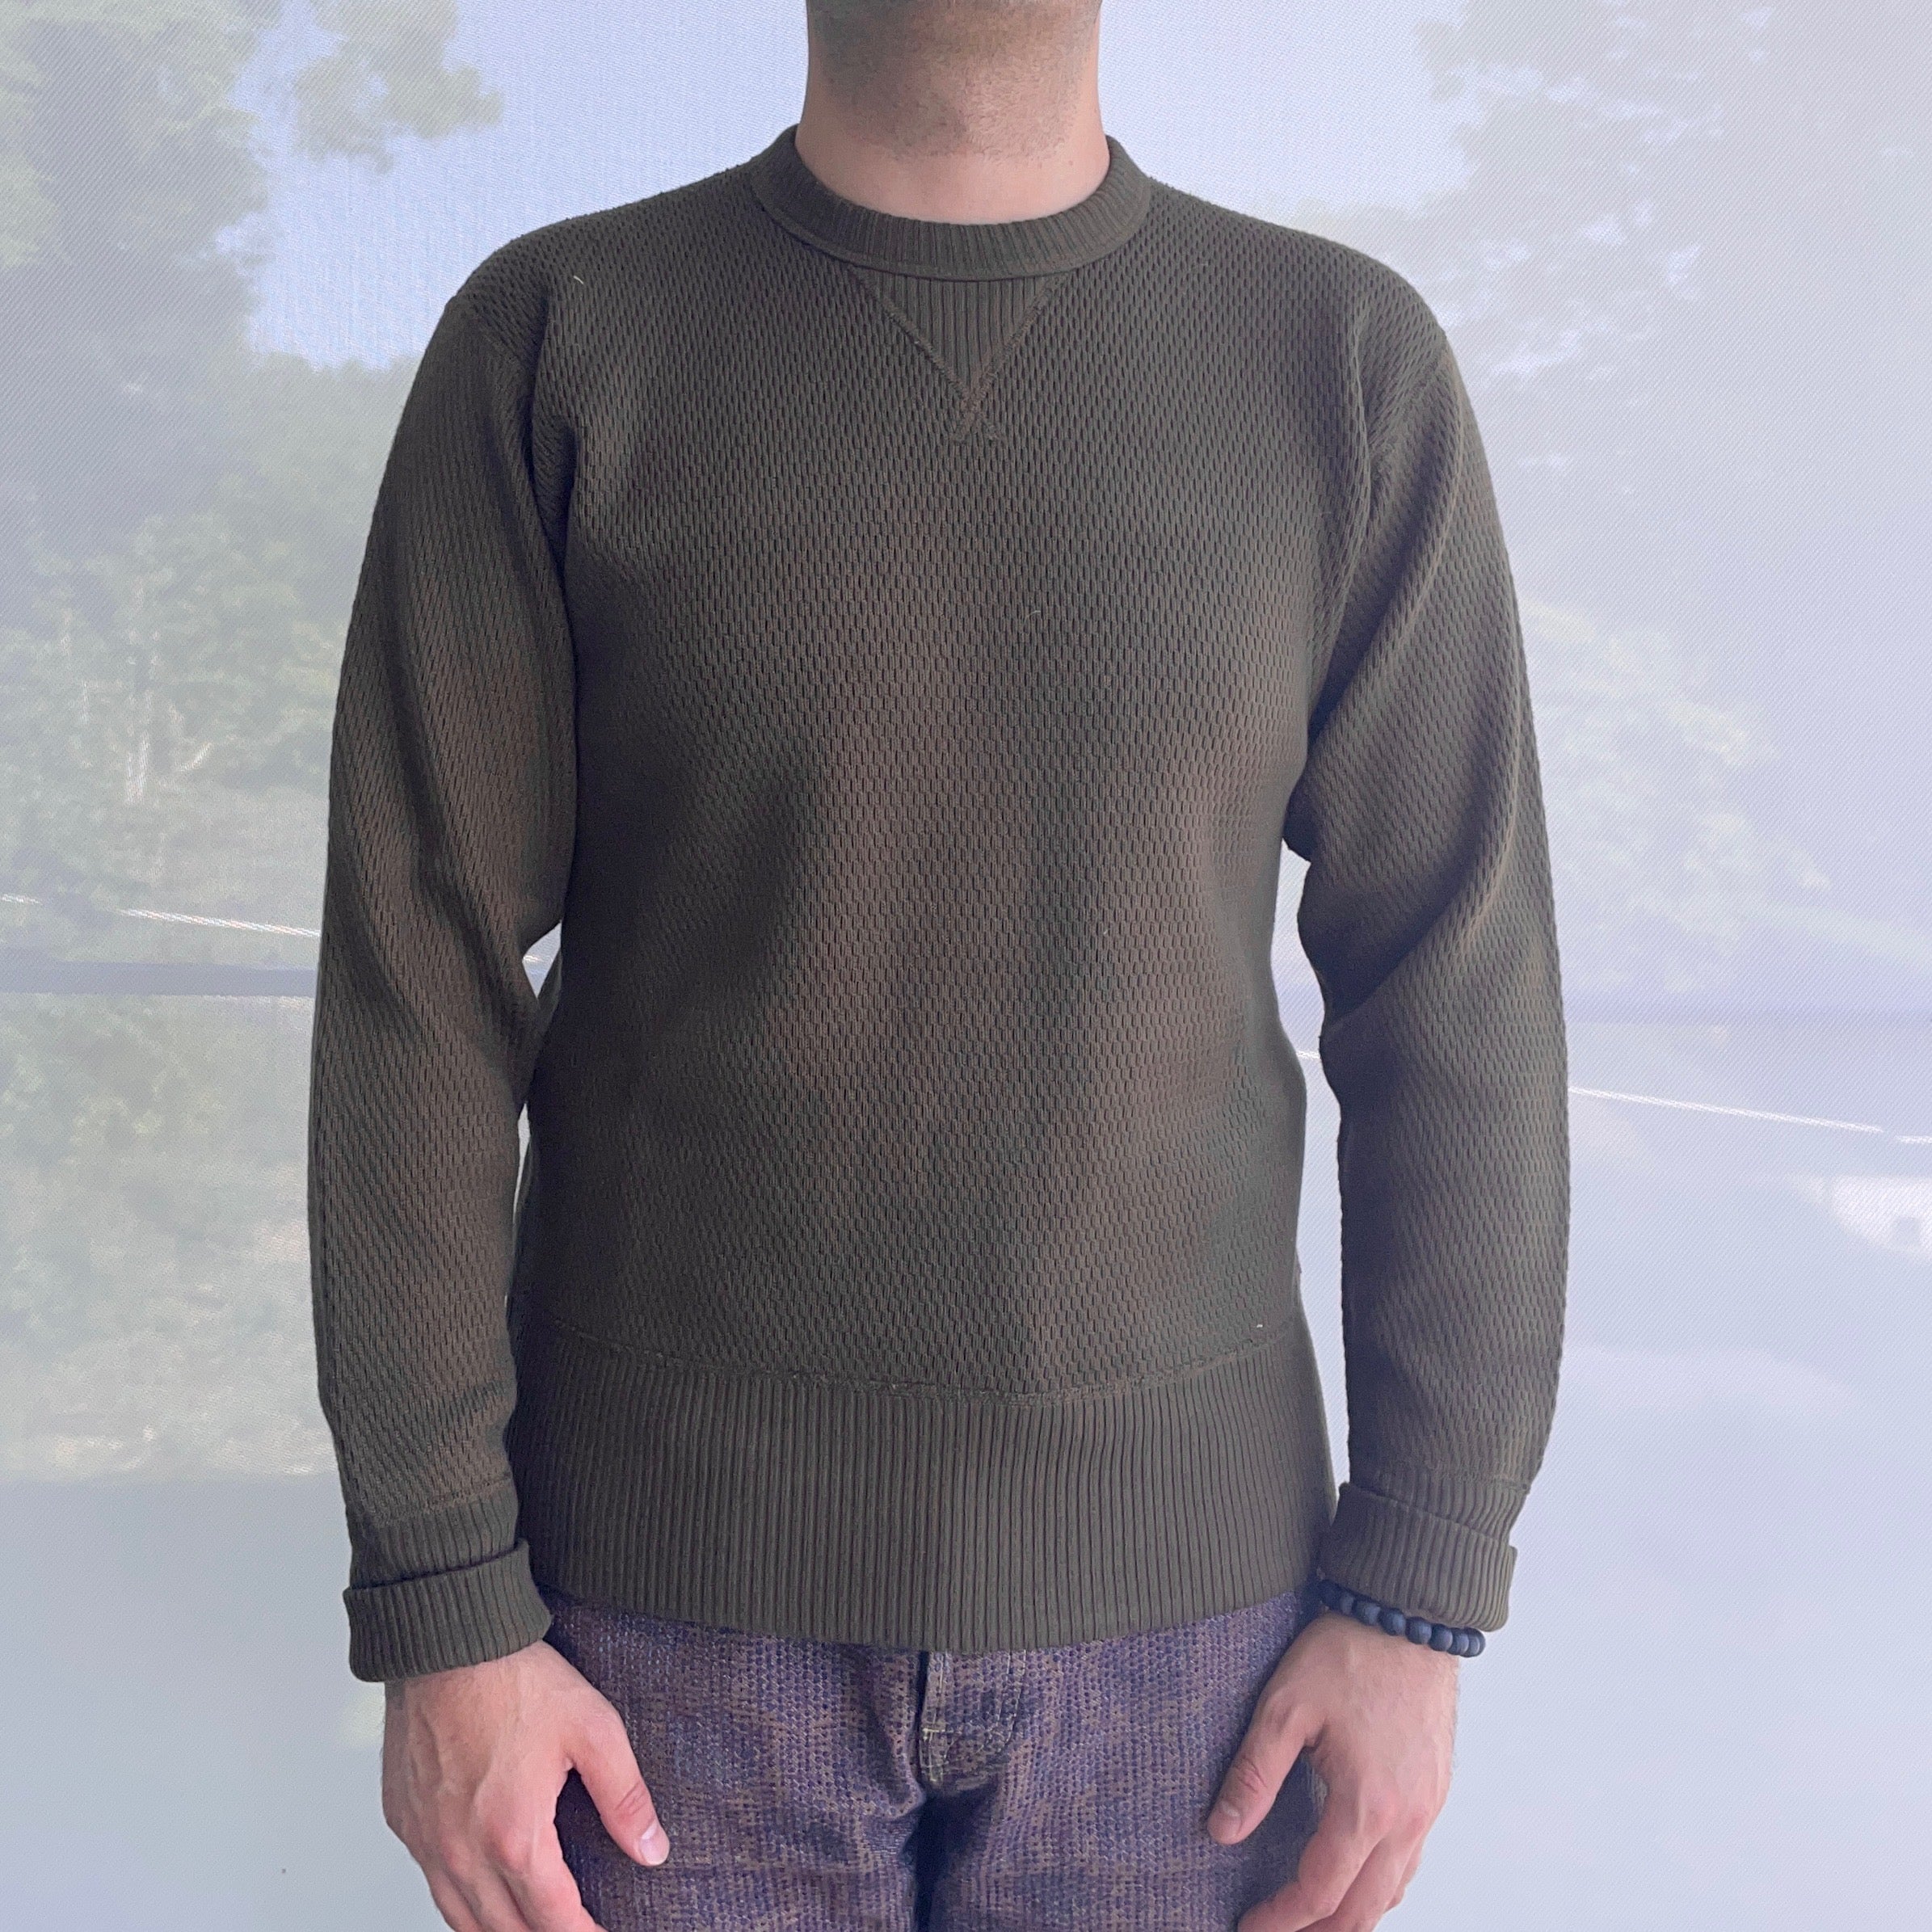 Ragtime Super Heavy Weight Thermal Shirts in Overdyed Olive Drab